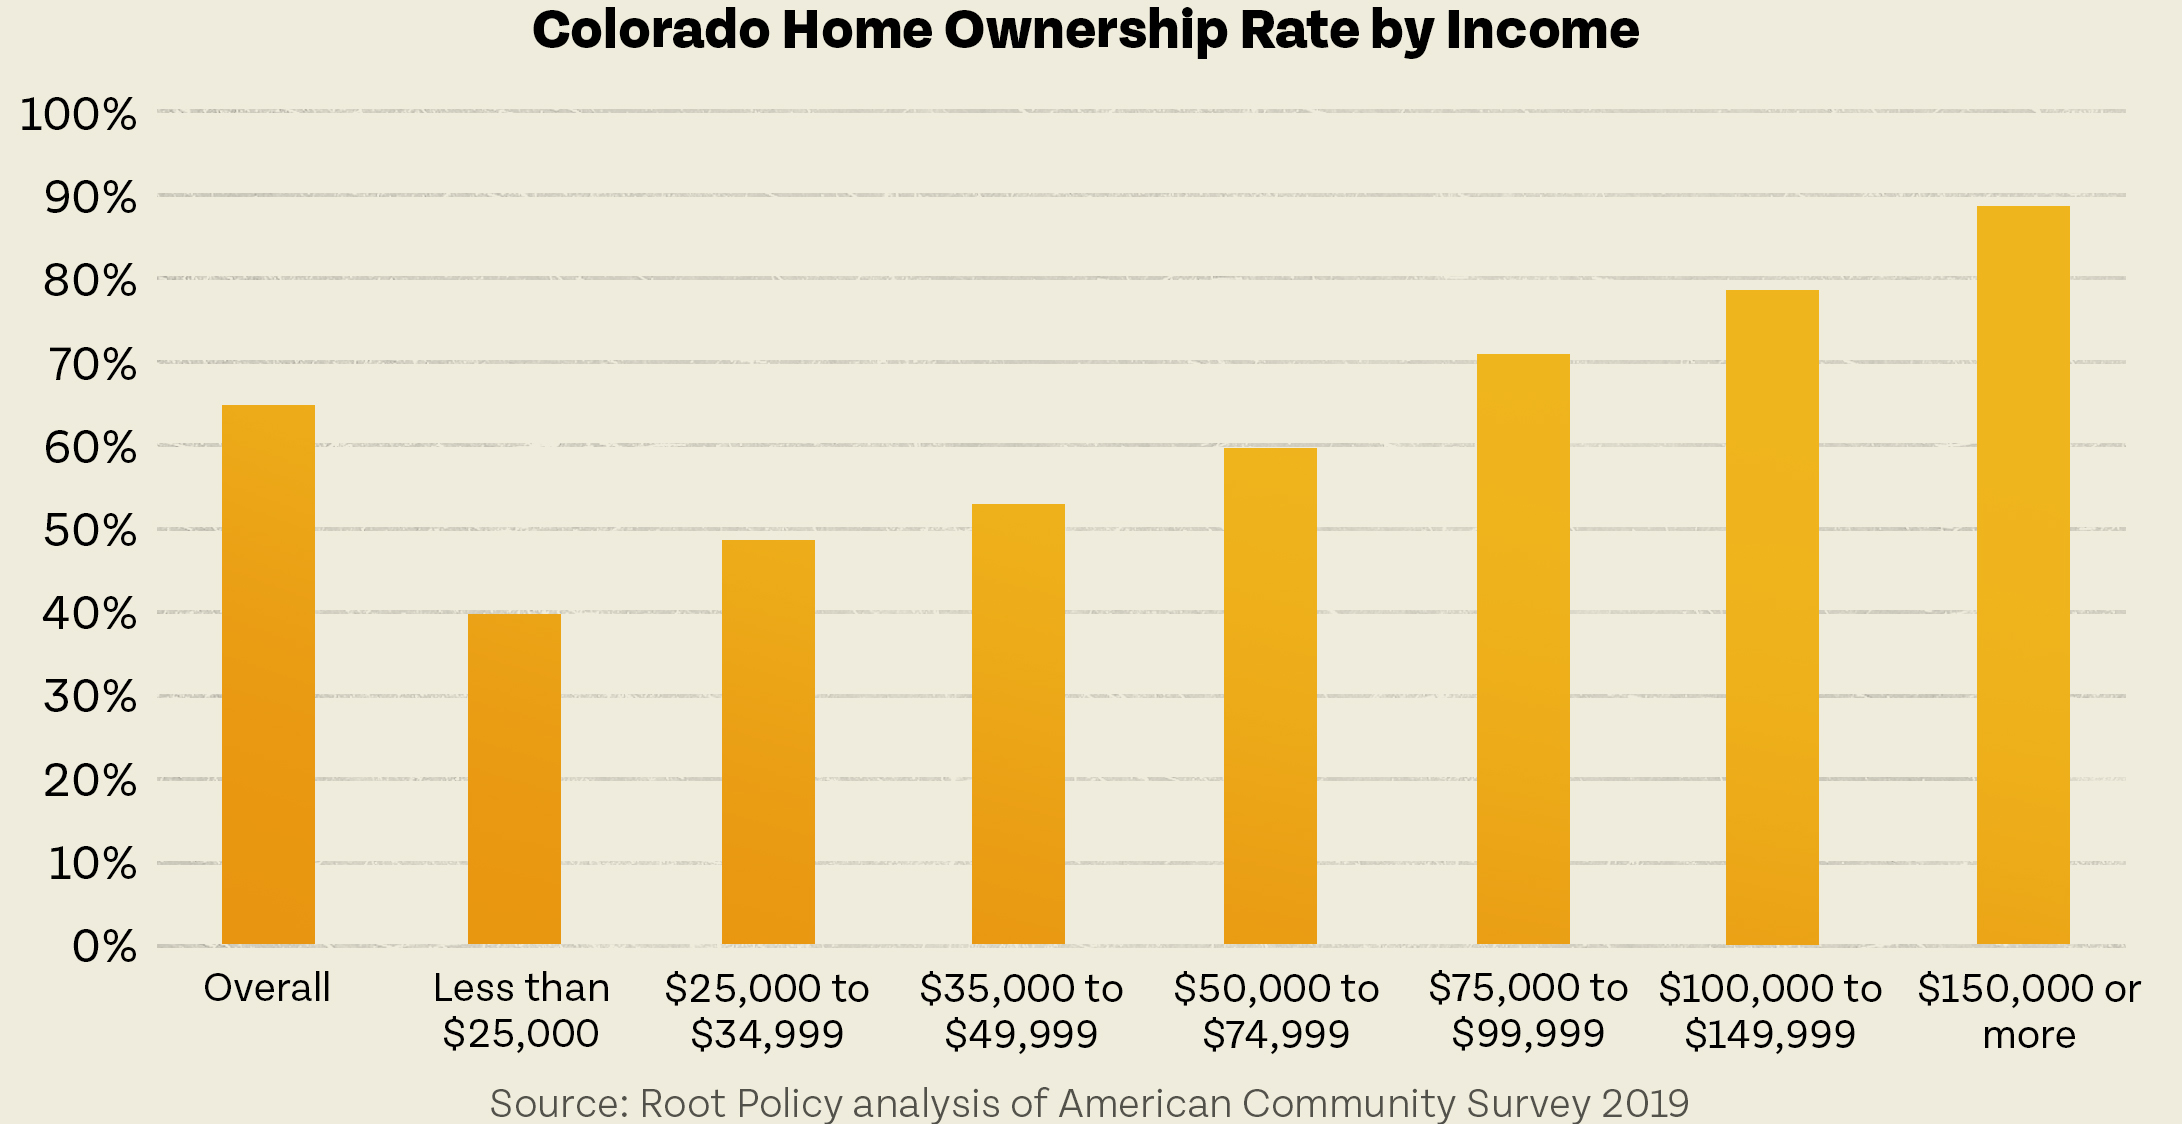 Bar chart showing the increasing rate of home ownership by income levels in Colorado, based on housing data from the American Community Survey 2019.